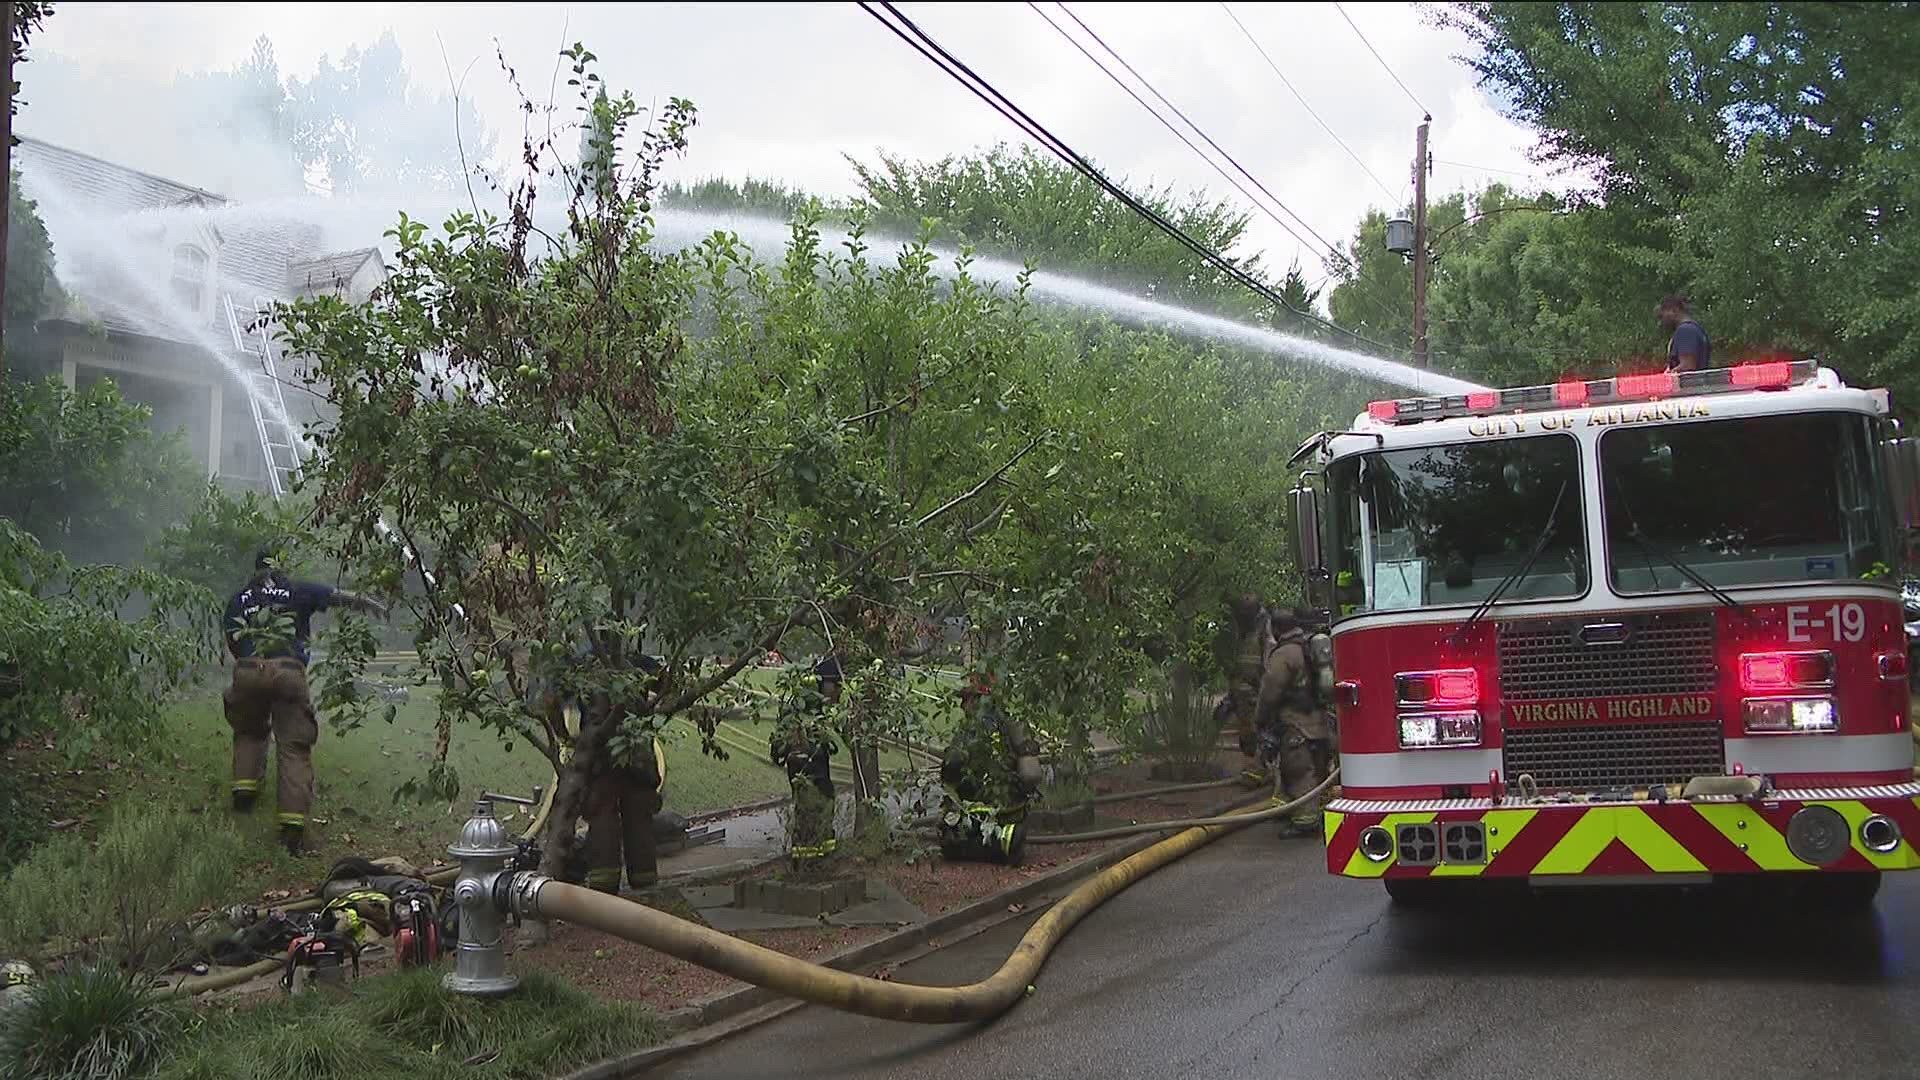 Following a house fire in the Virginia Highlands area on June 13, an Atlanta fire truck needed to be towed away from the scene of the fire because it broke down.